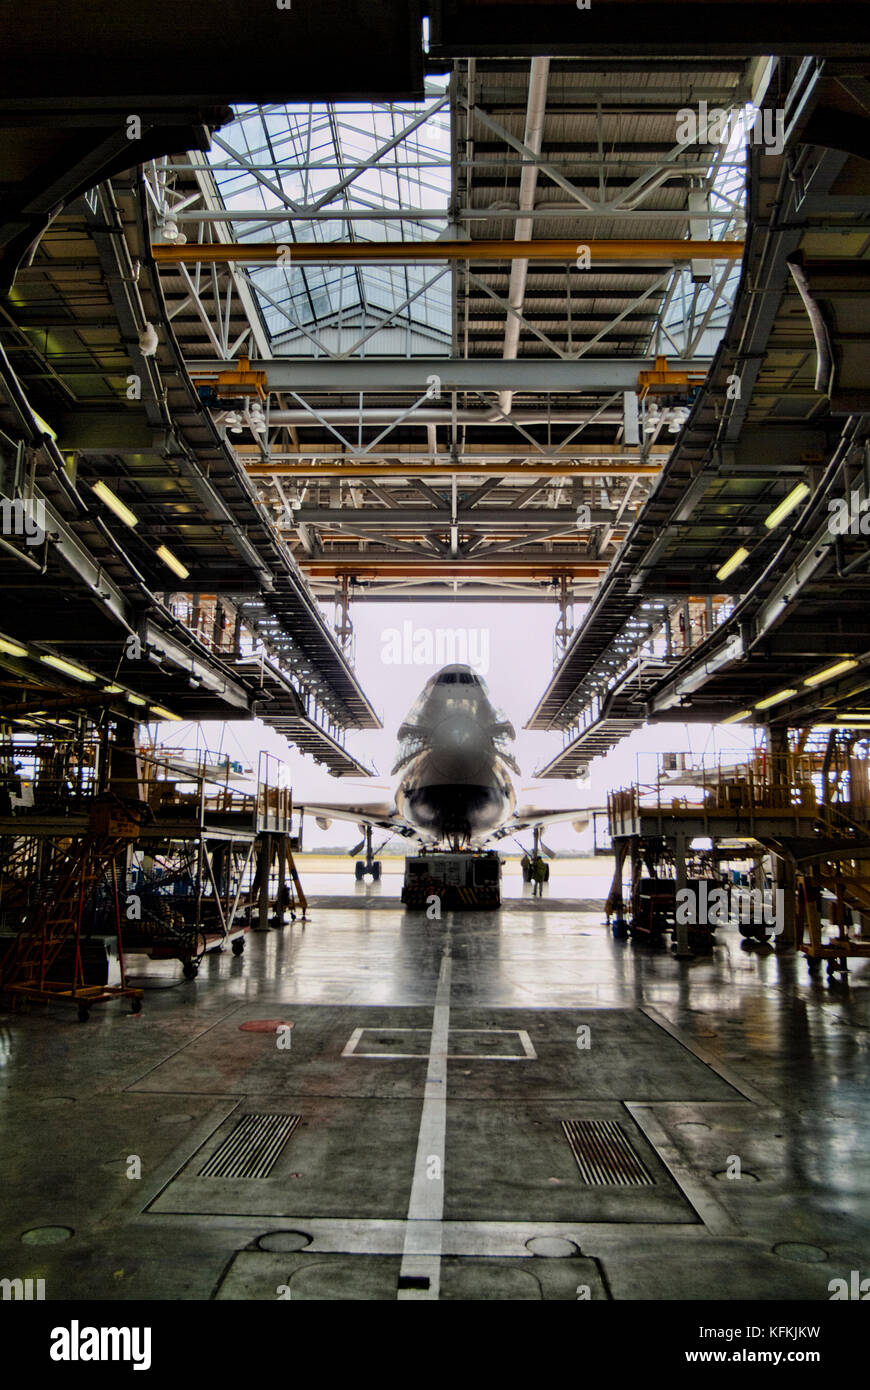 A Boeing 747-400 passenger jet at the entrance to a maintenance bay. Stock Photo